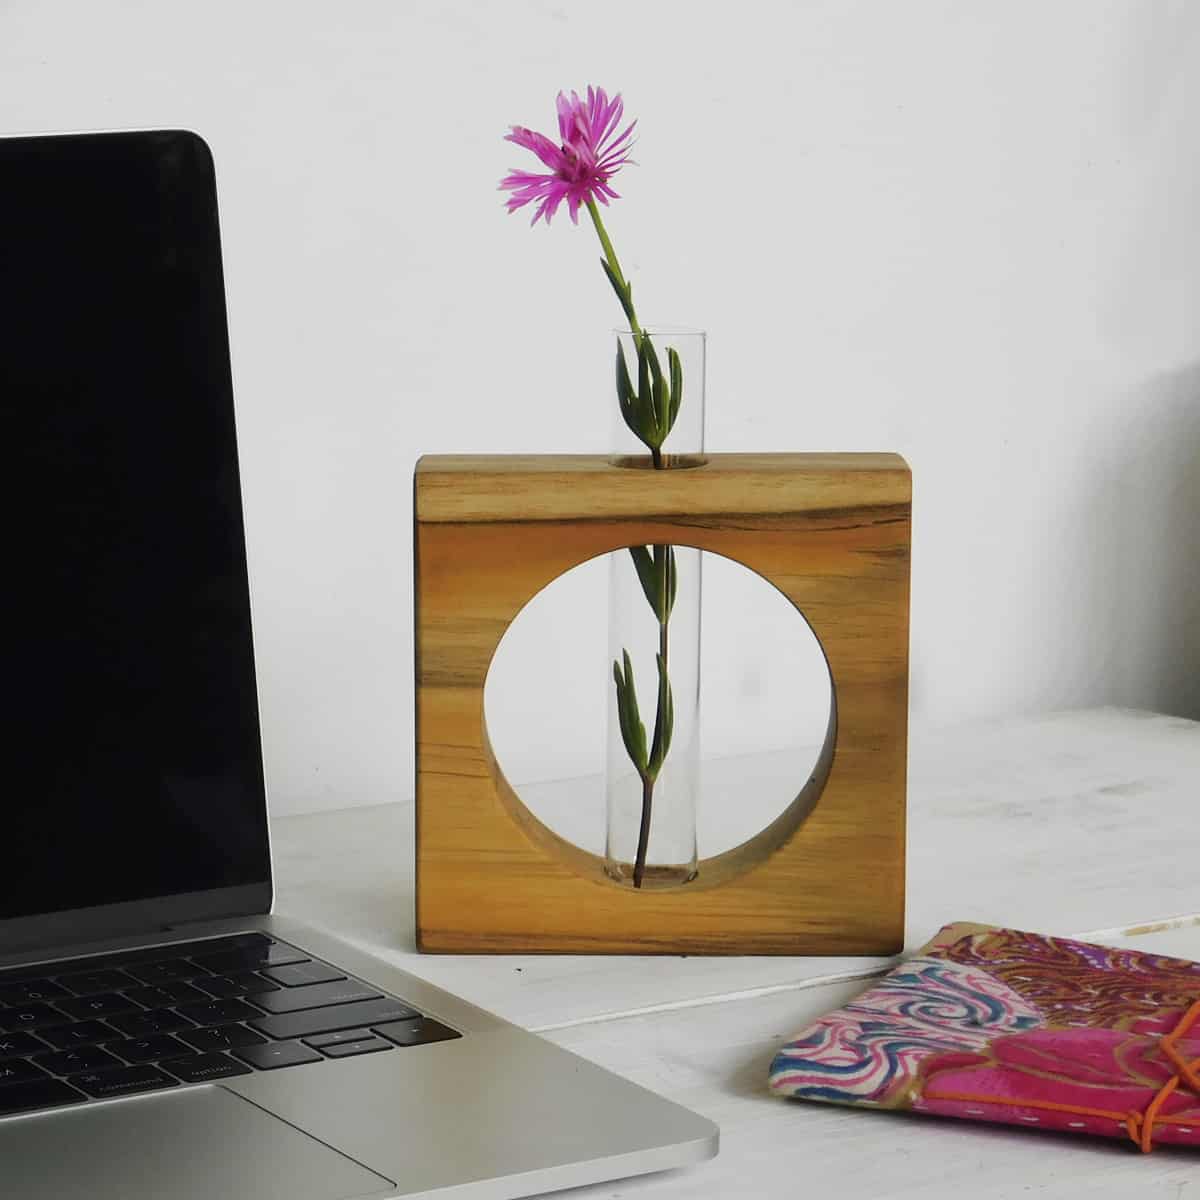 test tube plant holder with a circular wood frame on a desk by a laptop computer and red textile